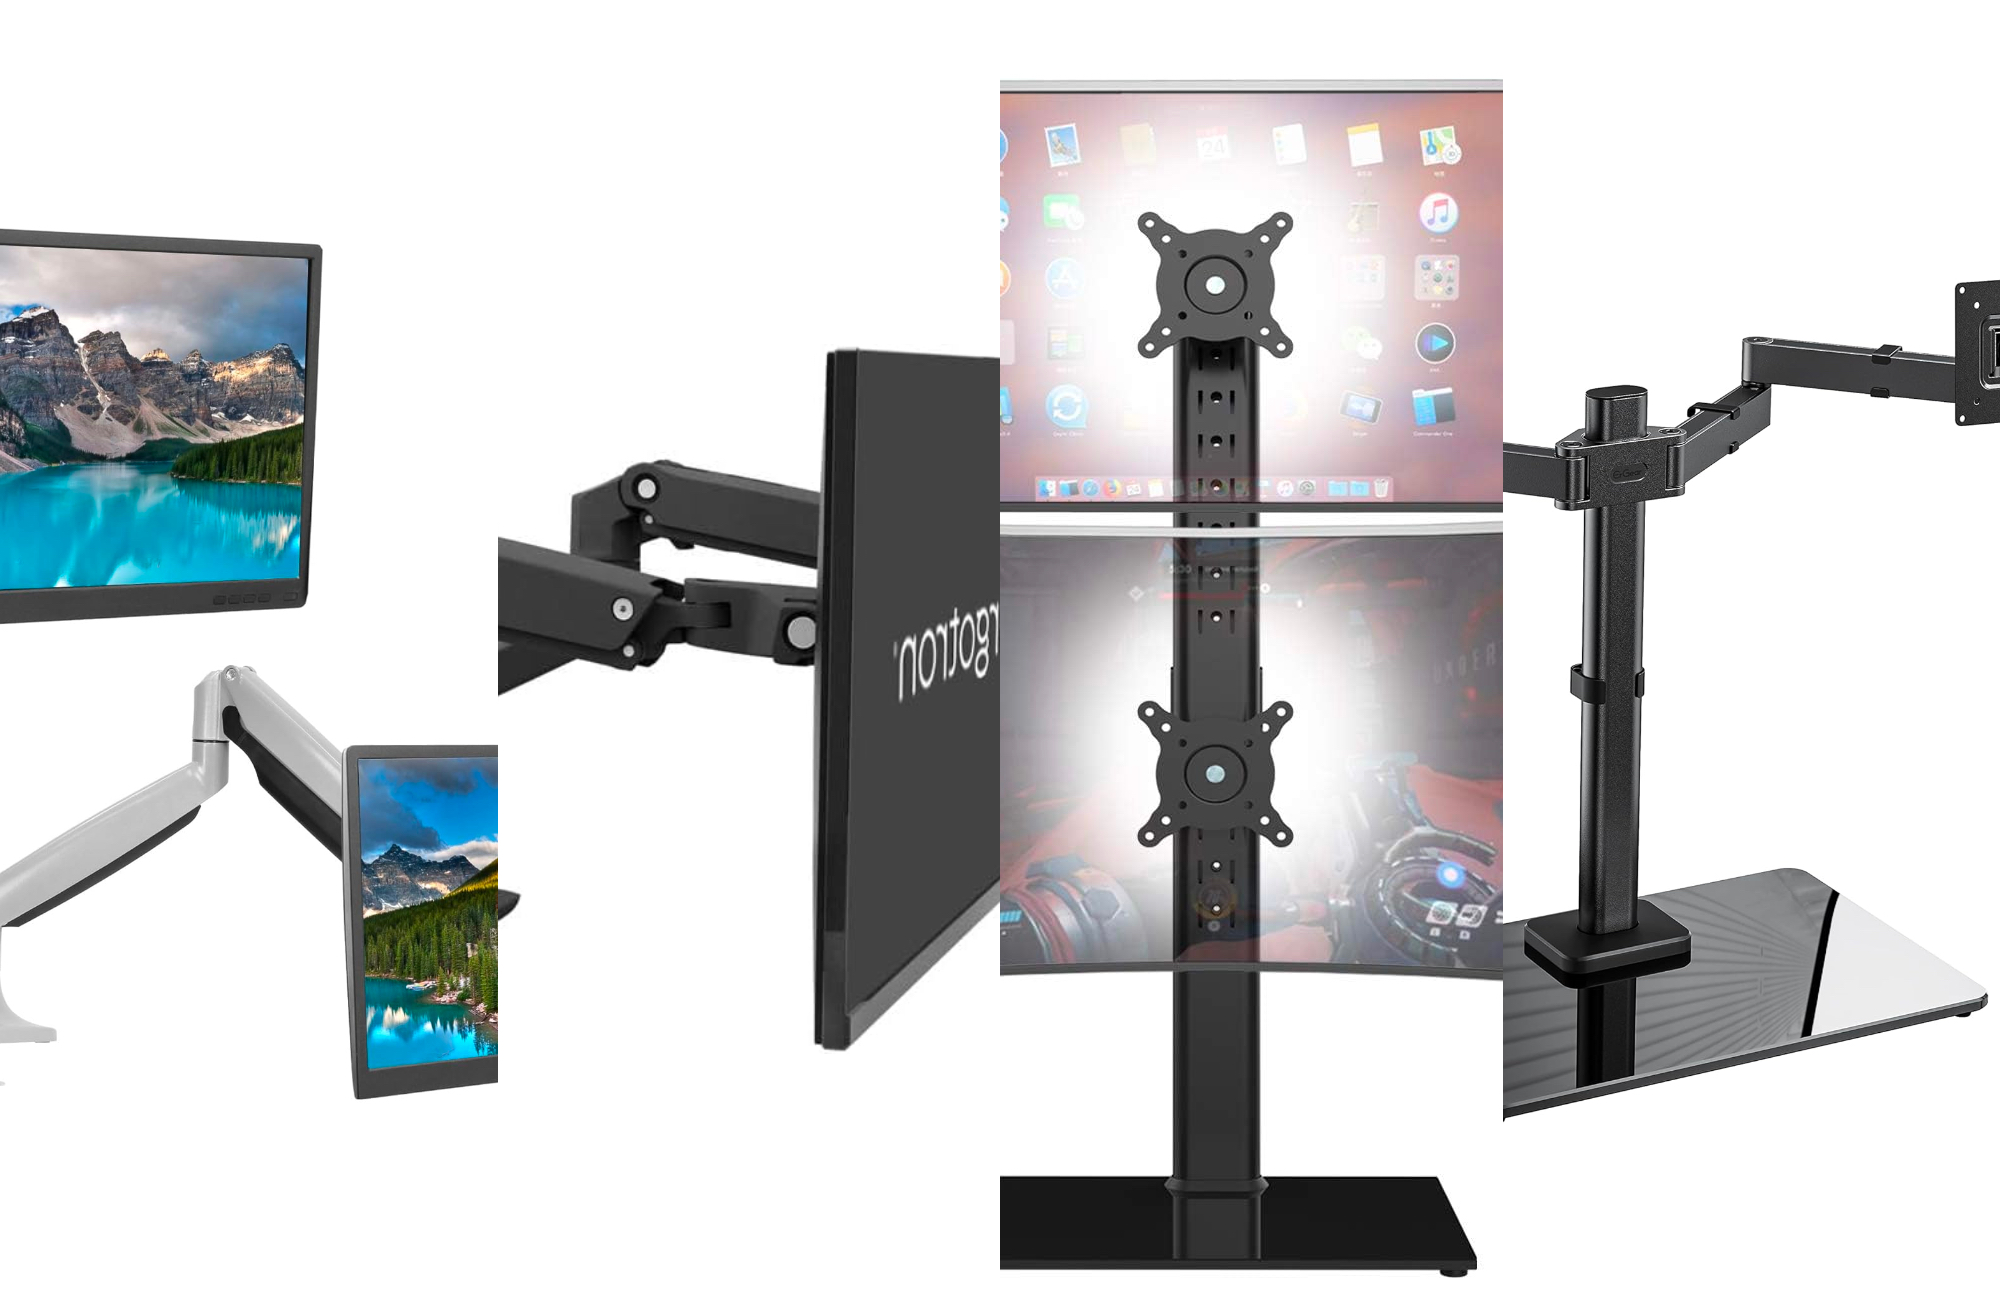 Mount-It! Monitor Wall Mount Arm | VESA Wall Mount Monitor Arm | Full  Motion Gas Spring Arm Fits 13 15 17 19 20 22 23 24 27 30 32 Inch Screens  with 75